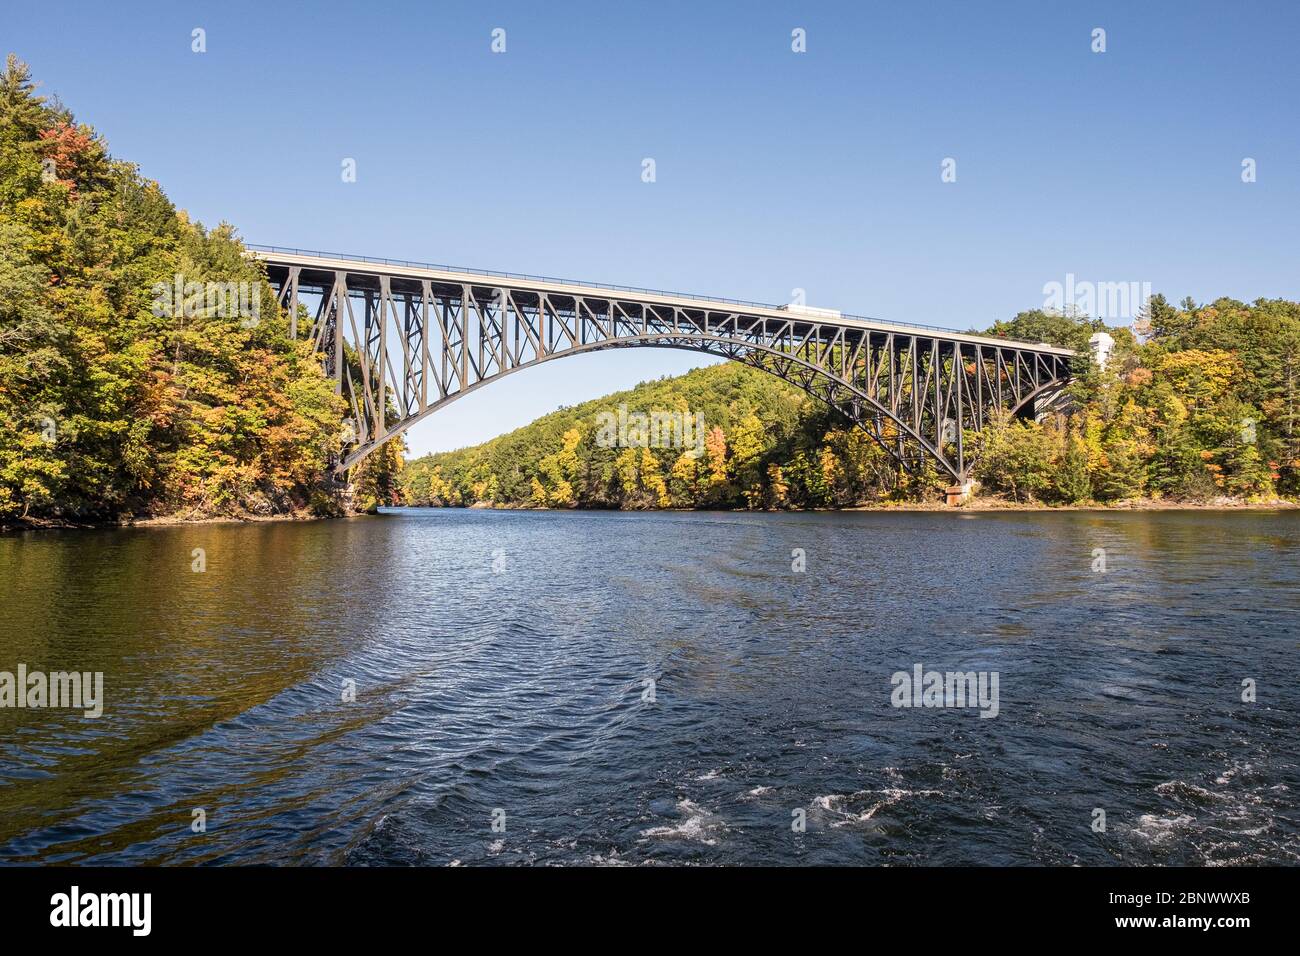 The French King Bridge crosses the Connecticut River between Erving and Gill, Massachusetts Stock Photo